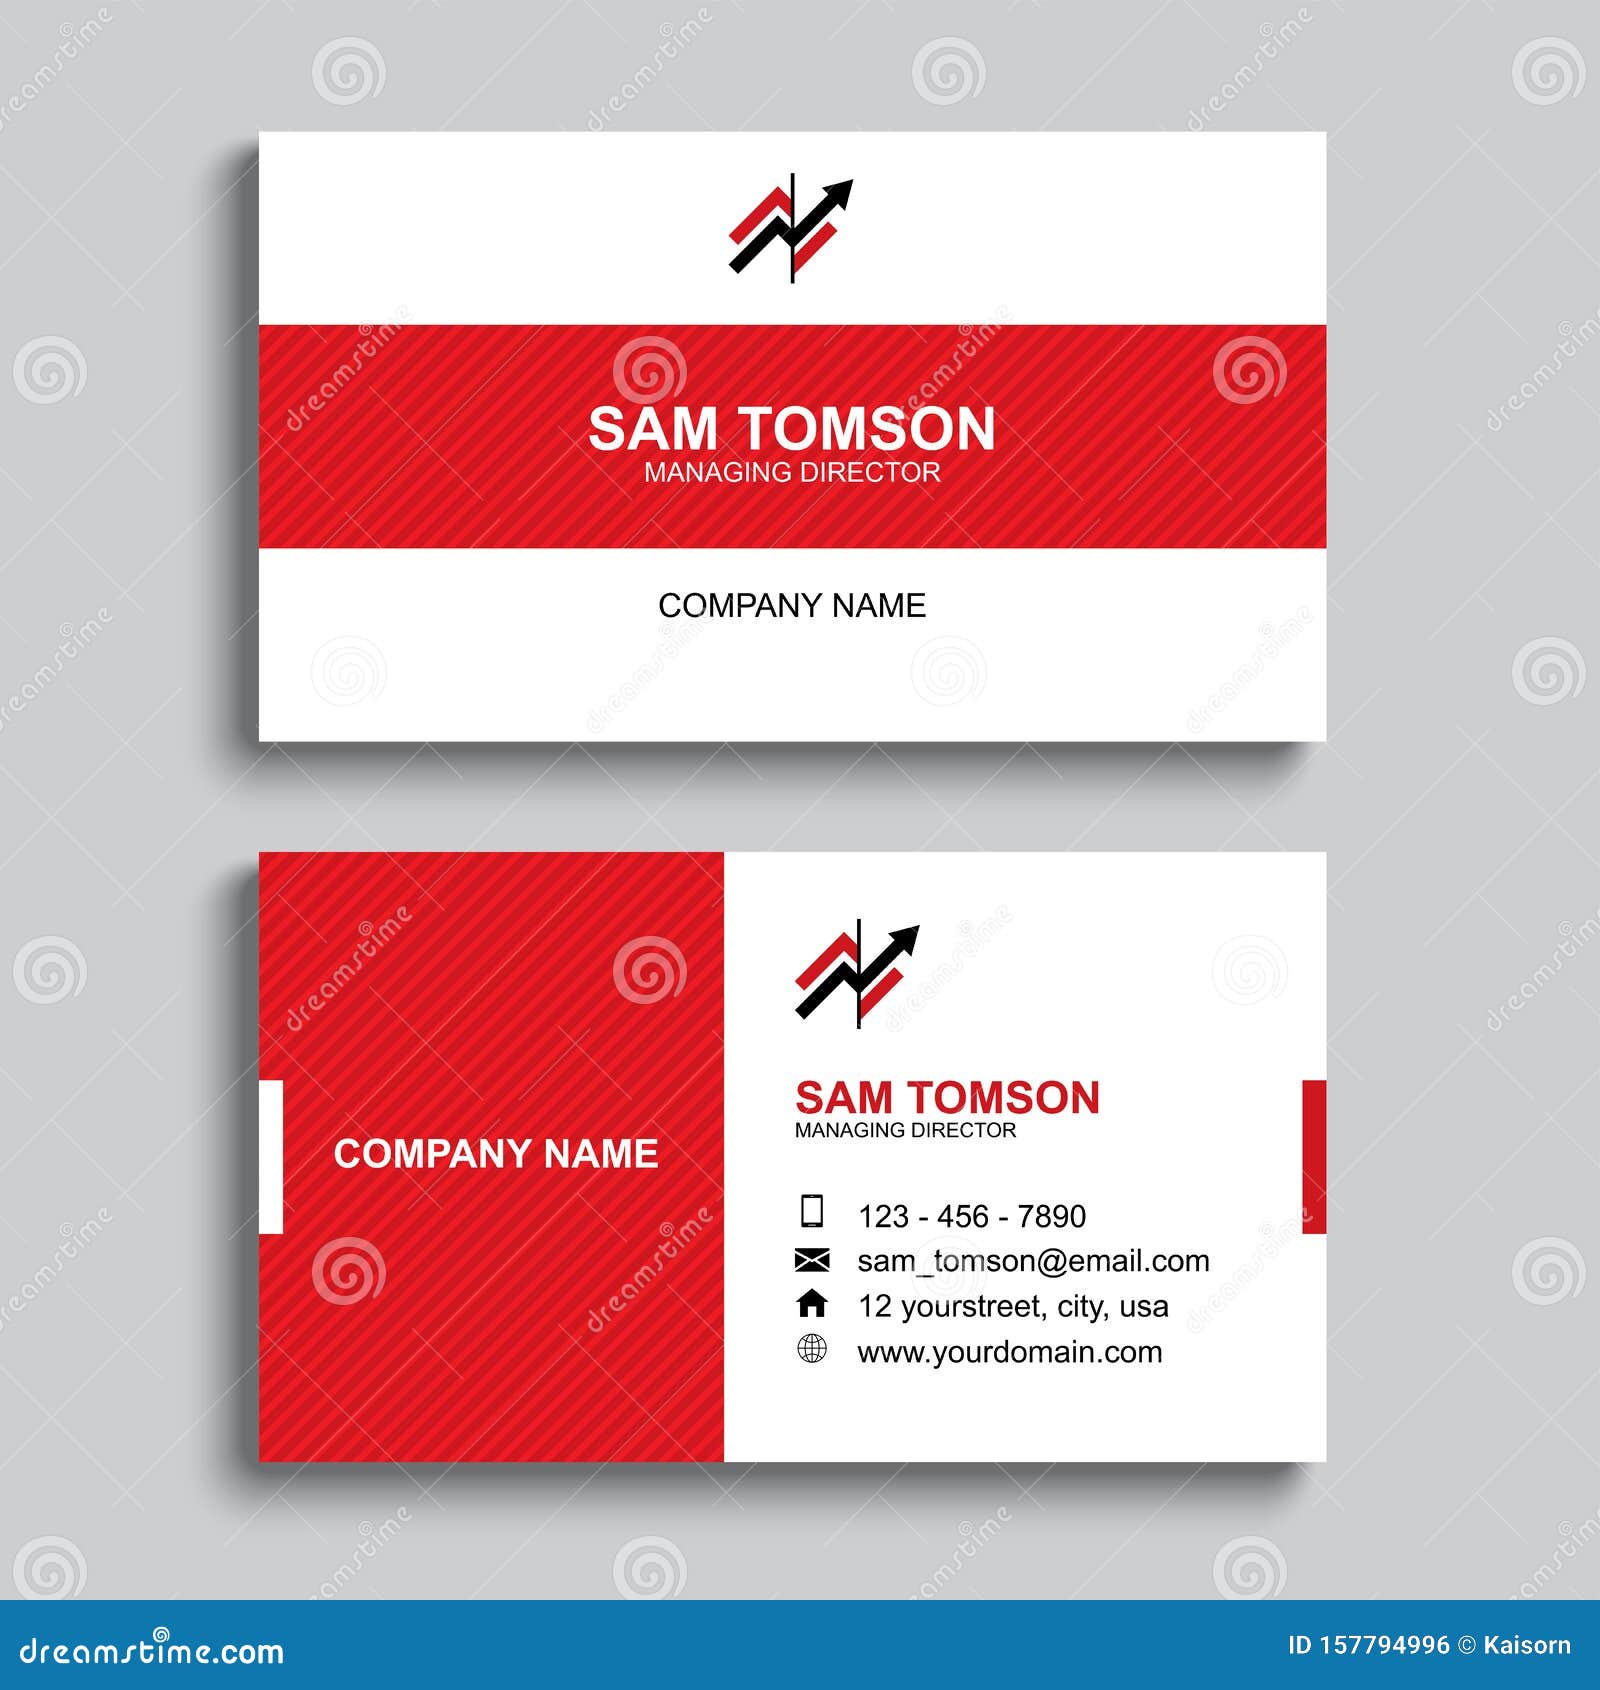 Minimal Business Card Print Template Design. Red Color and Simple Intended For Free Template Business Cards To Print